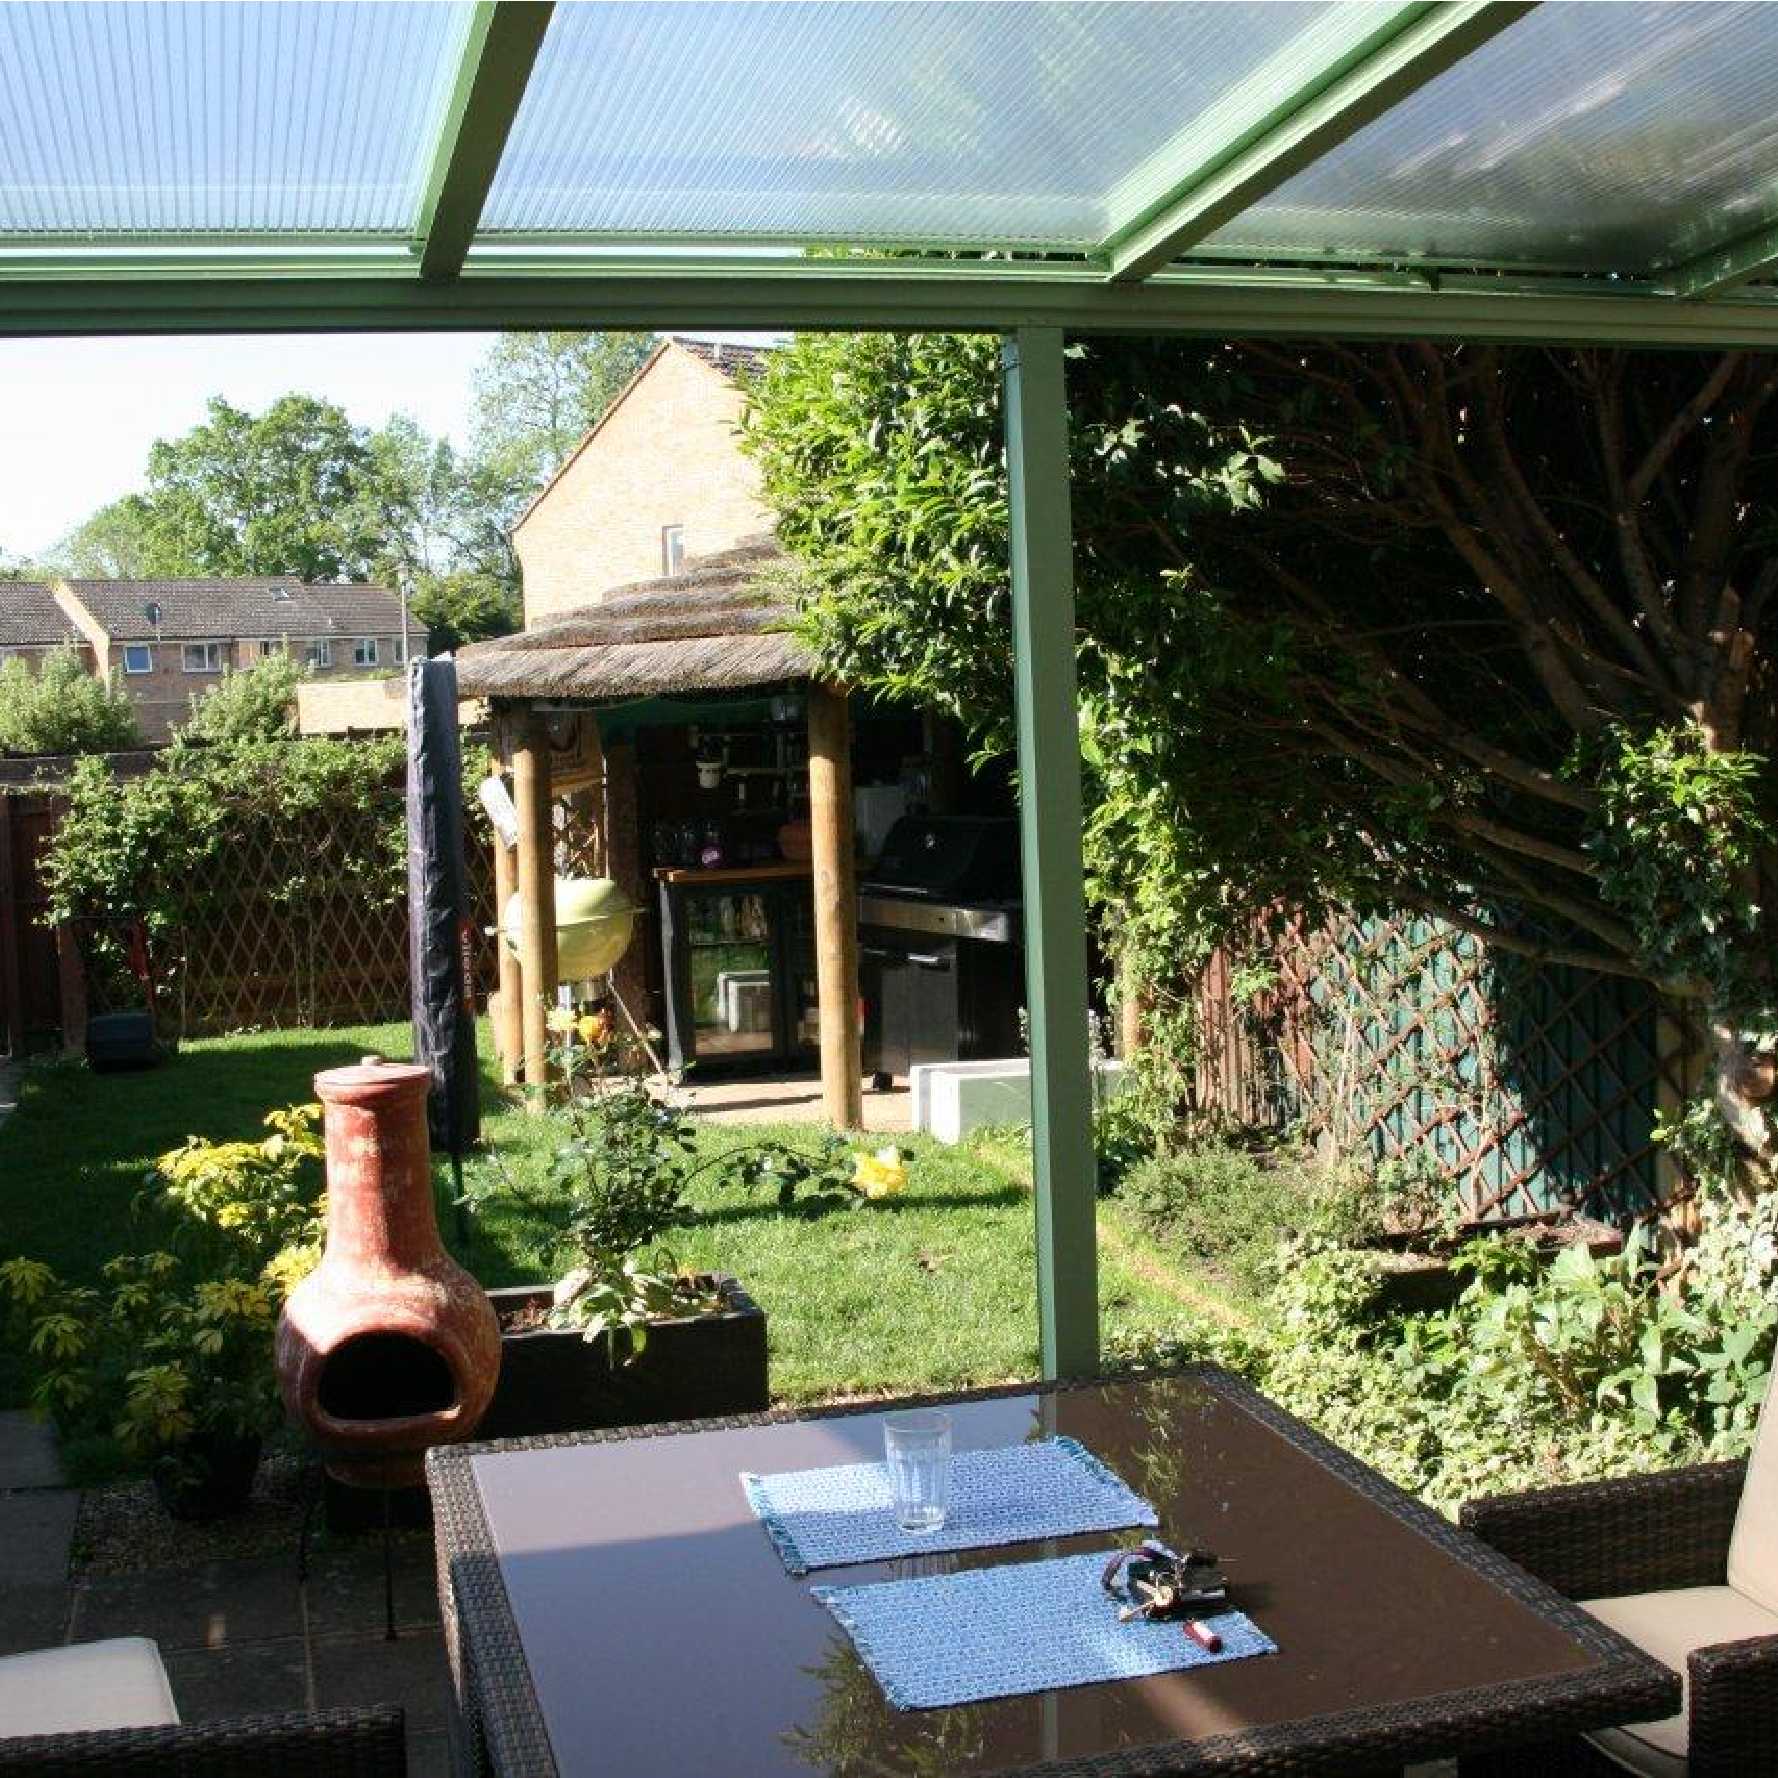 Affordable Omega Smart Lean-To Canopy, White with 16mm Polycarbonate Glazing - 5.6m (W) x 4.0m (P), (3) Supporting Posts